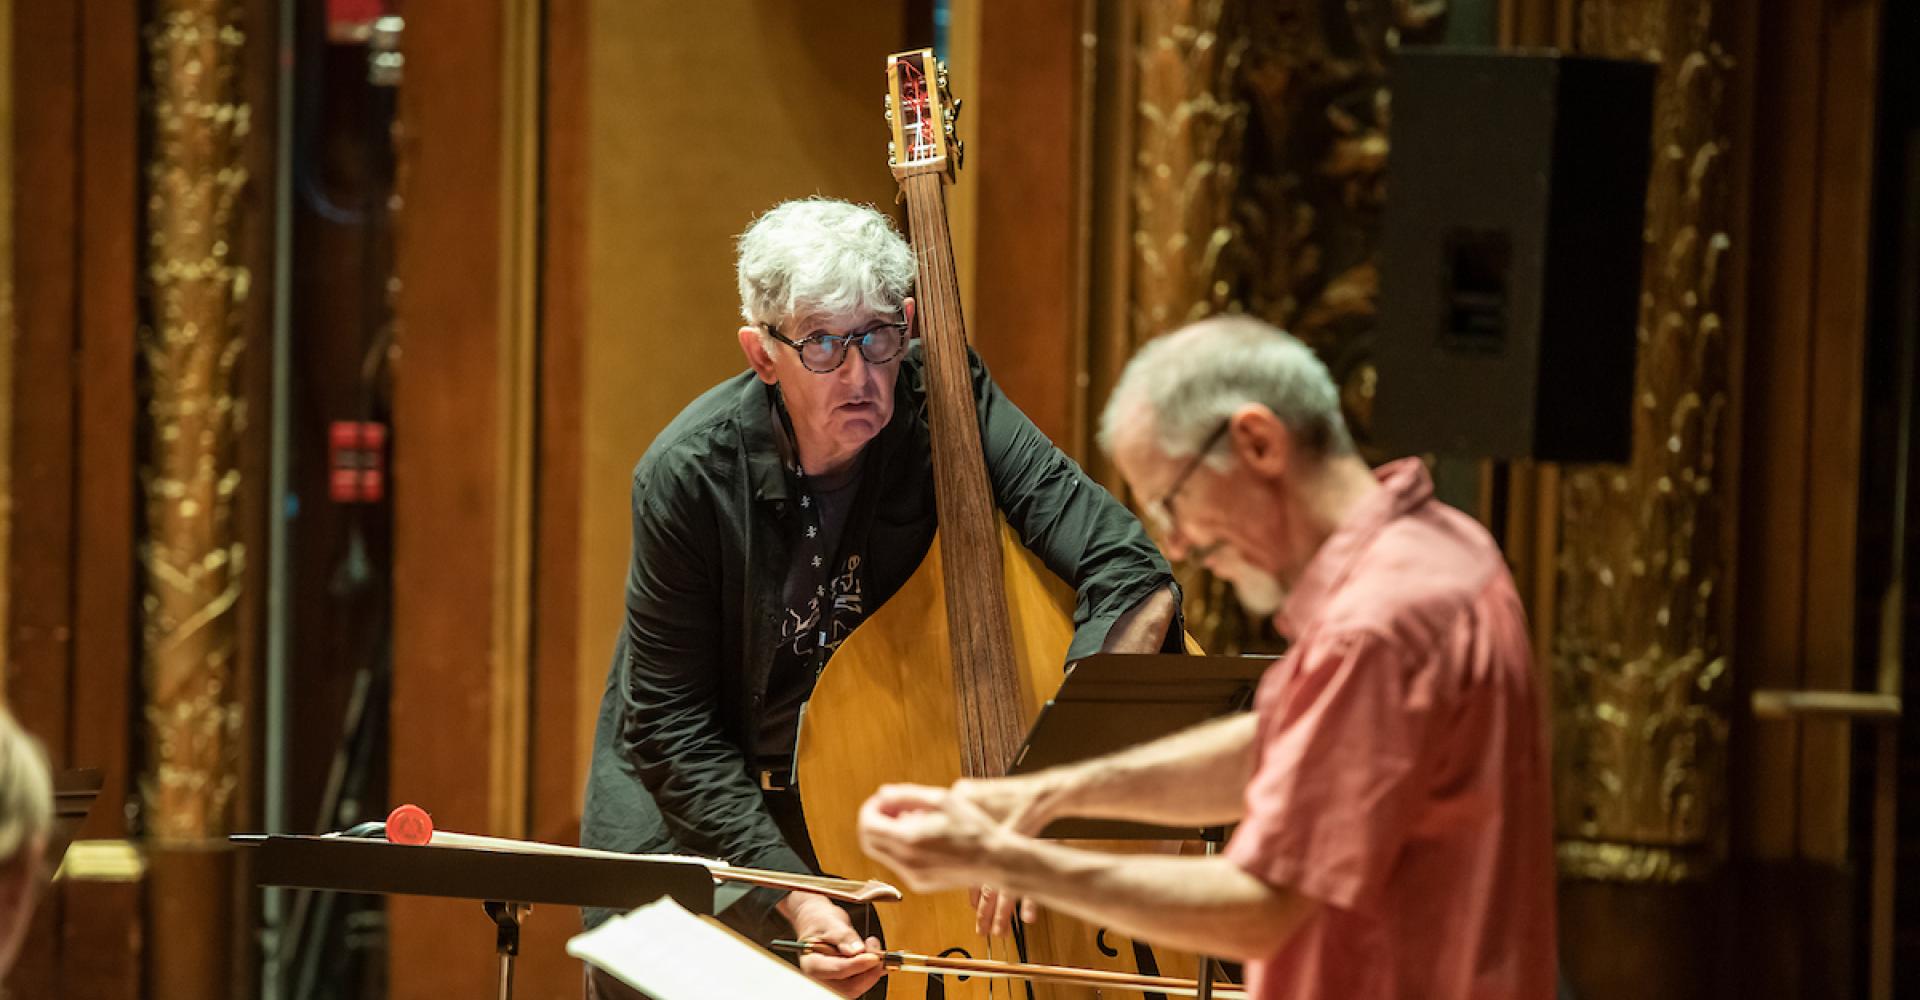 Mark Dresser plays bass and looks closely at conductor Steve Drury.